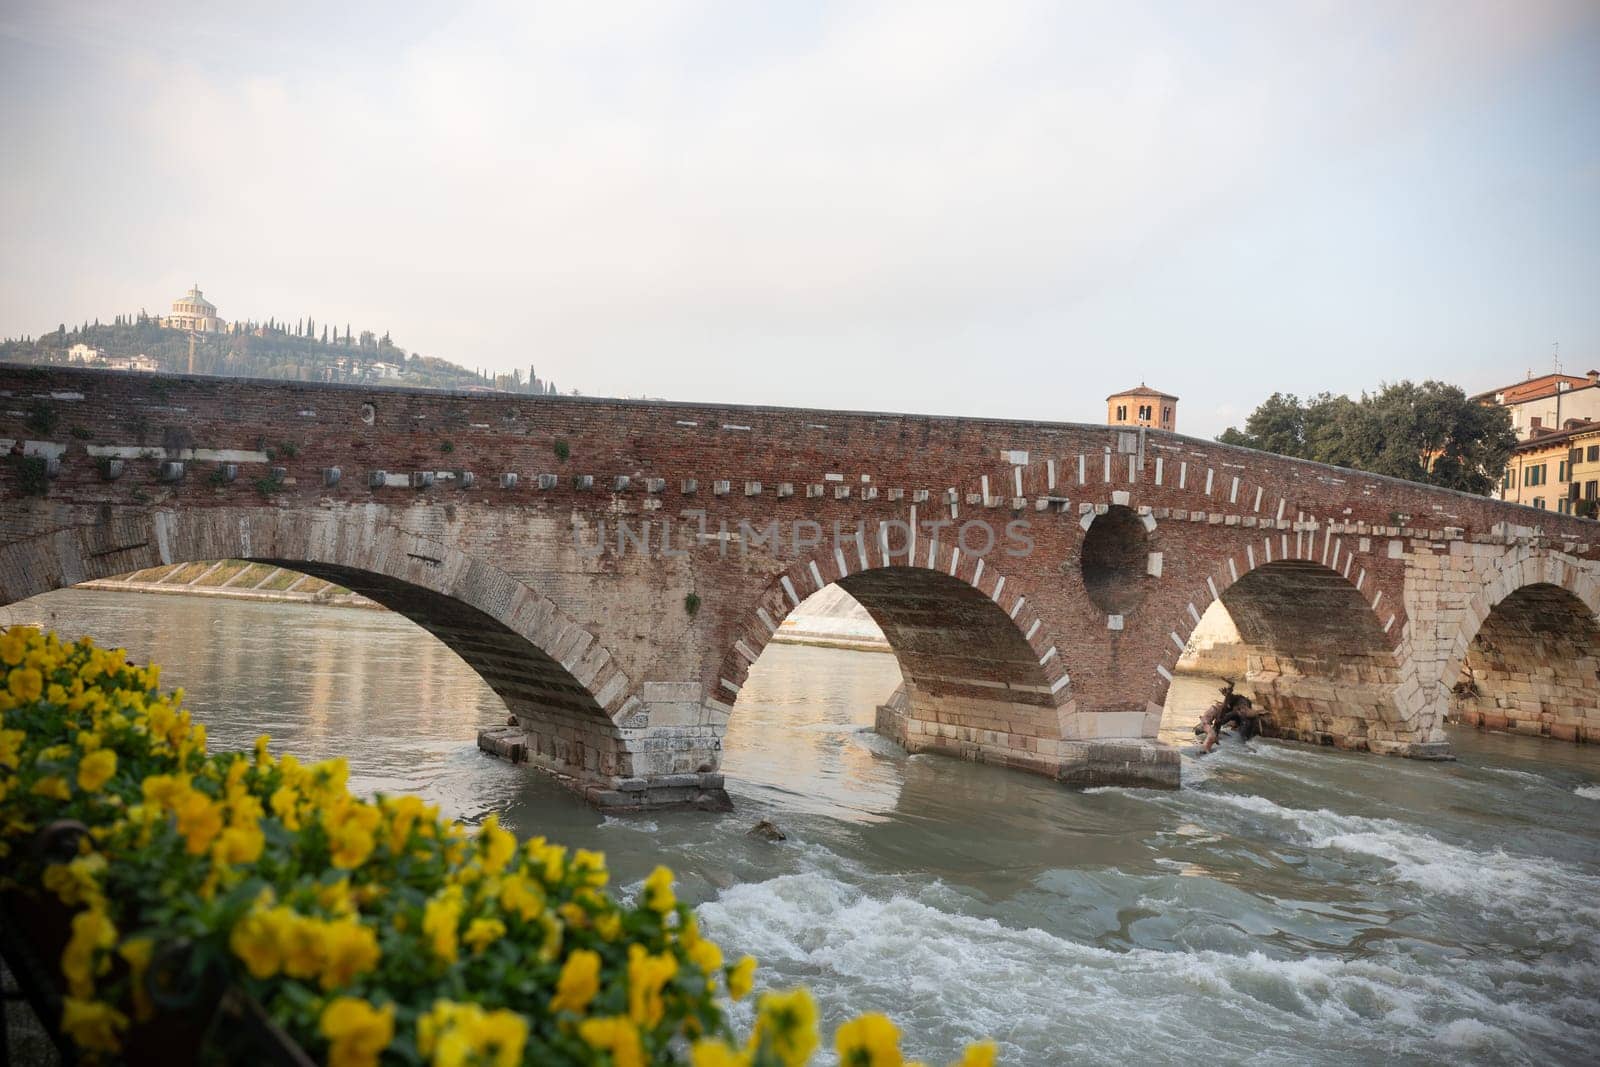 An arched bridge over flowing water - italian medieval landscape by Studia72